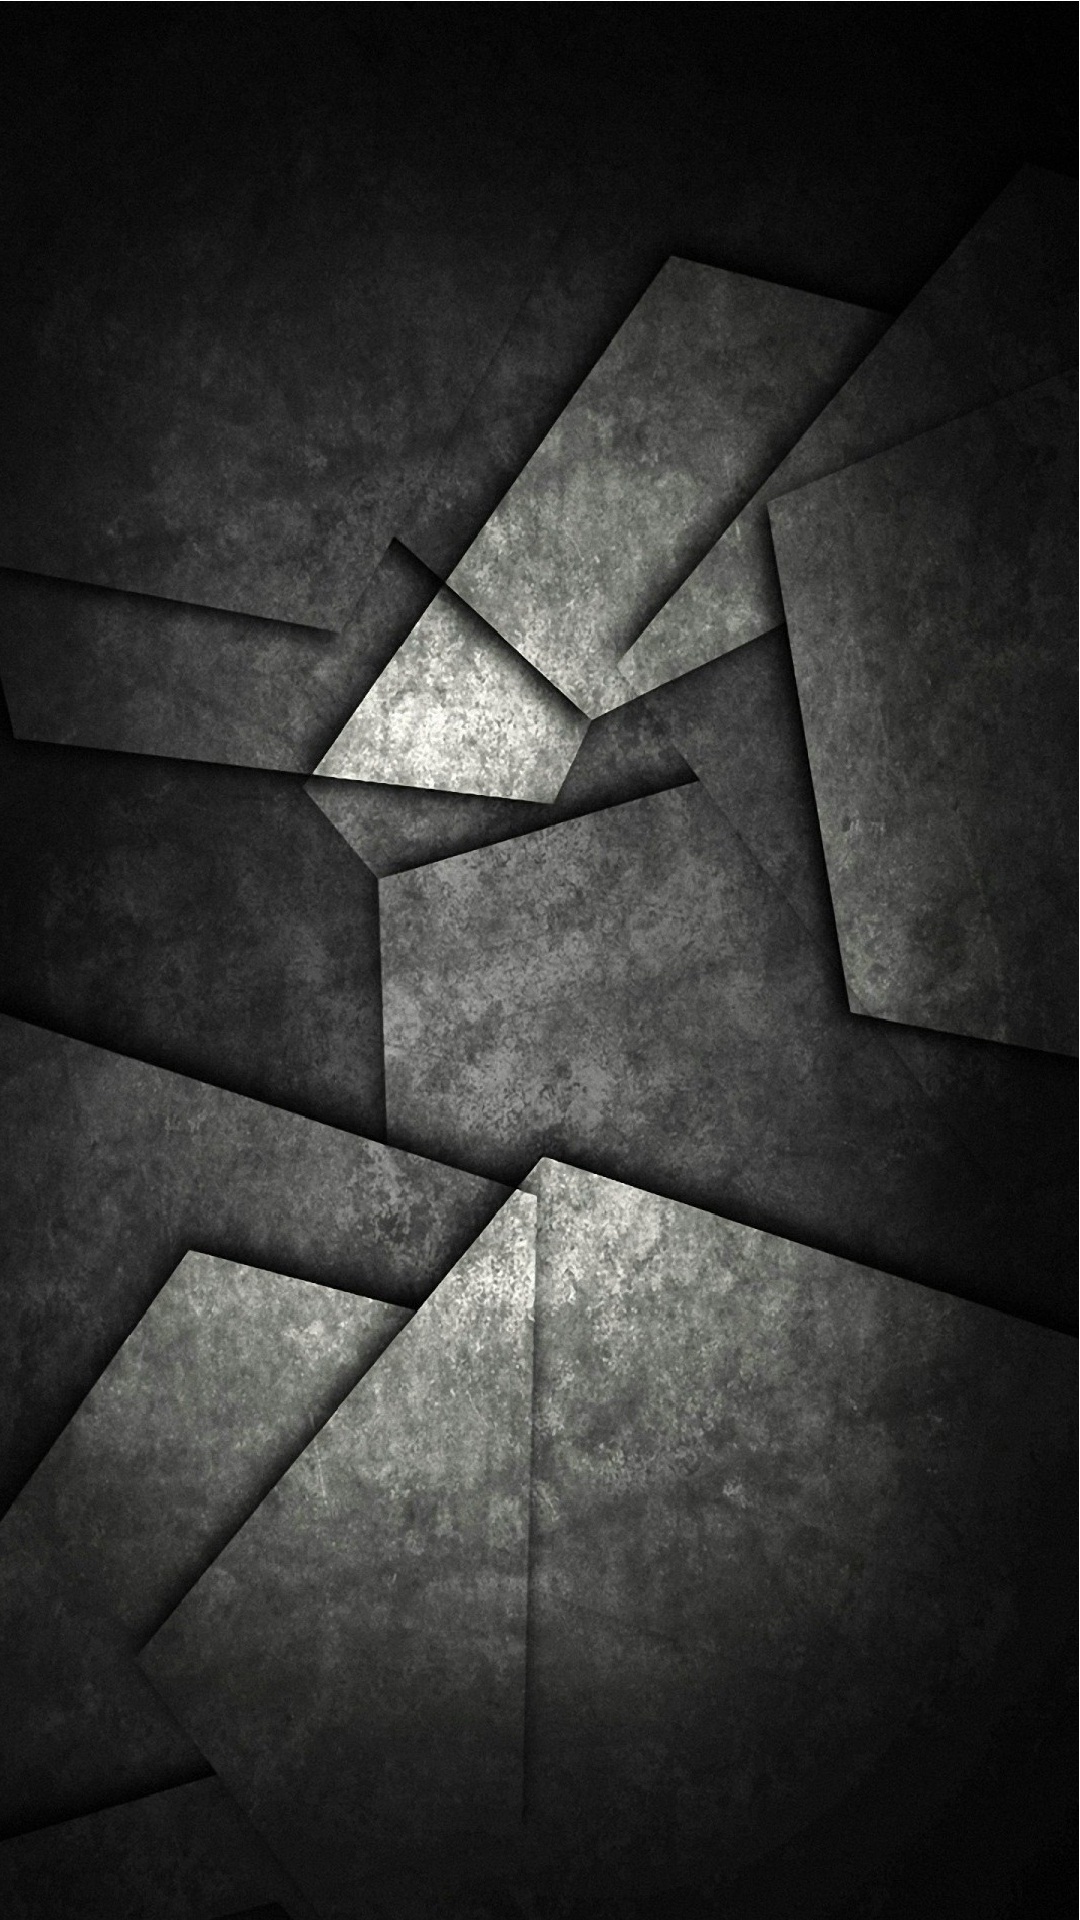 Abstract Wallpaper For Mobile Android Resolution 1080x1920